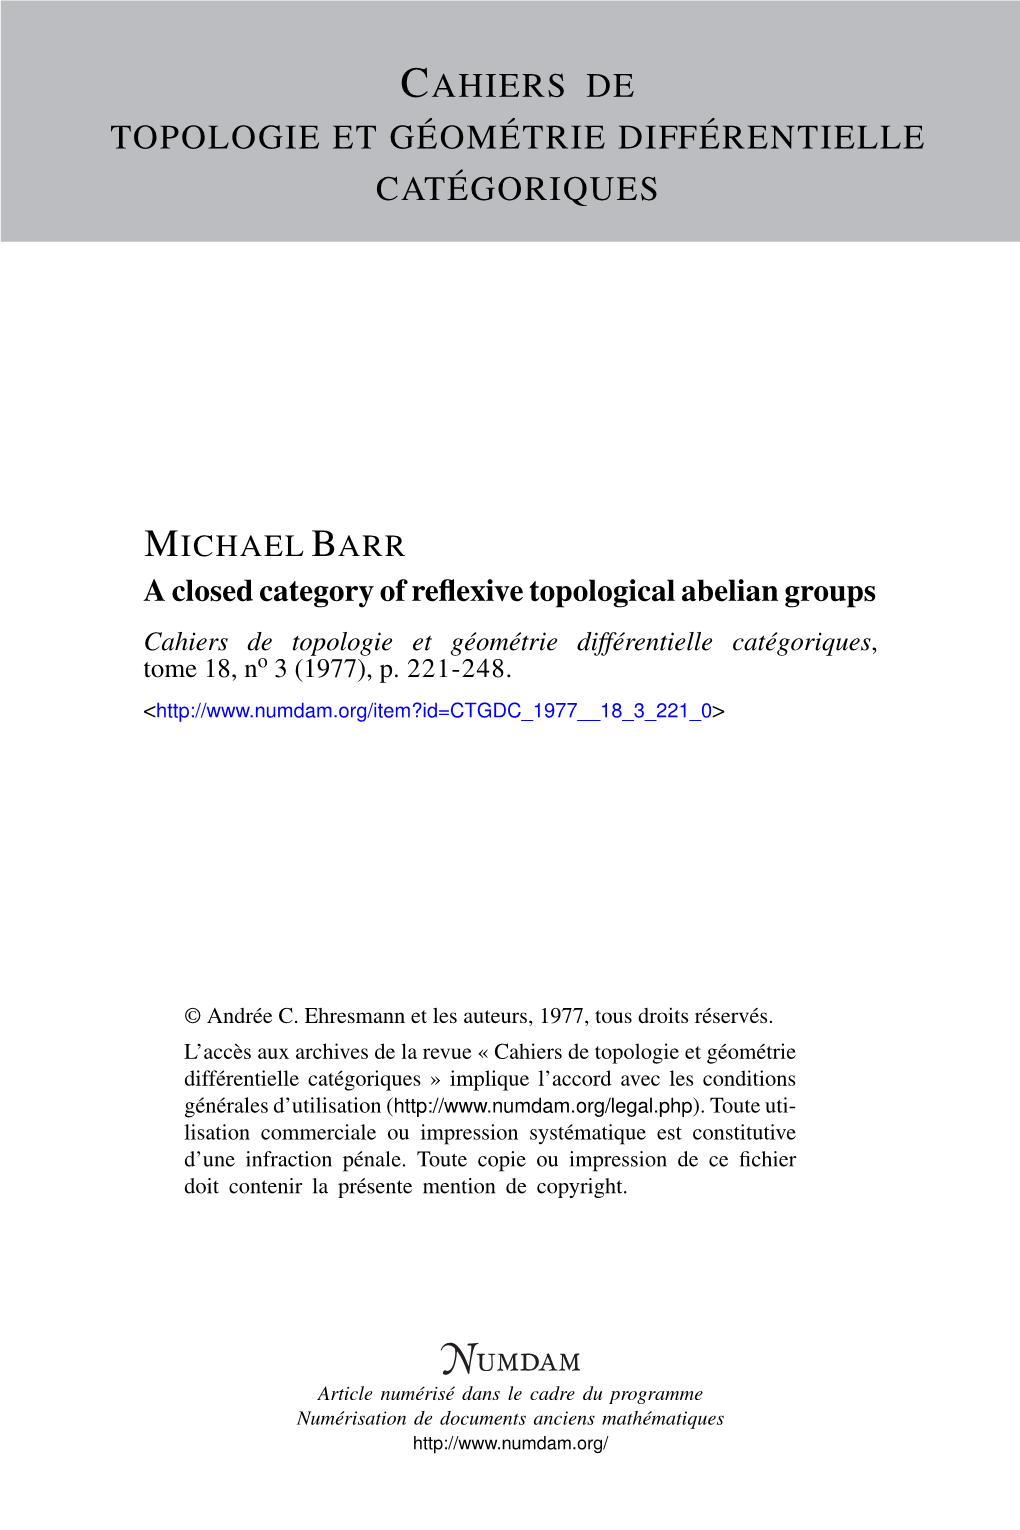 A CLOSED CATEGORY of REFLEXIVE TOPOLOGICAL ABELIAN GROUPS by Michael BARR